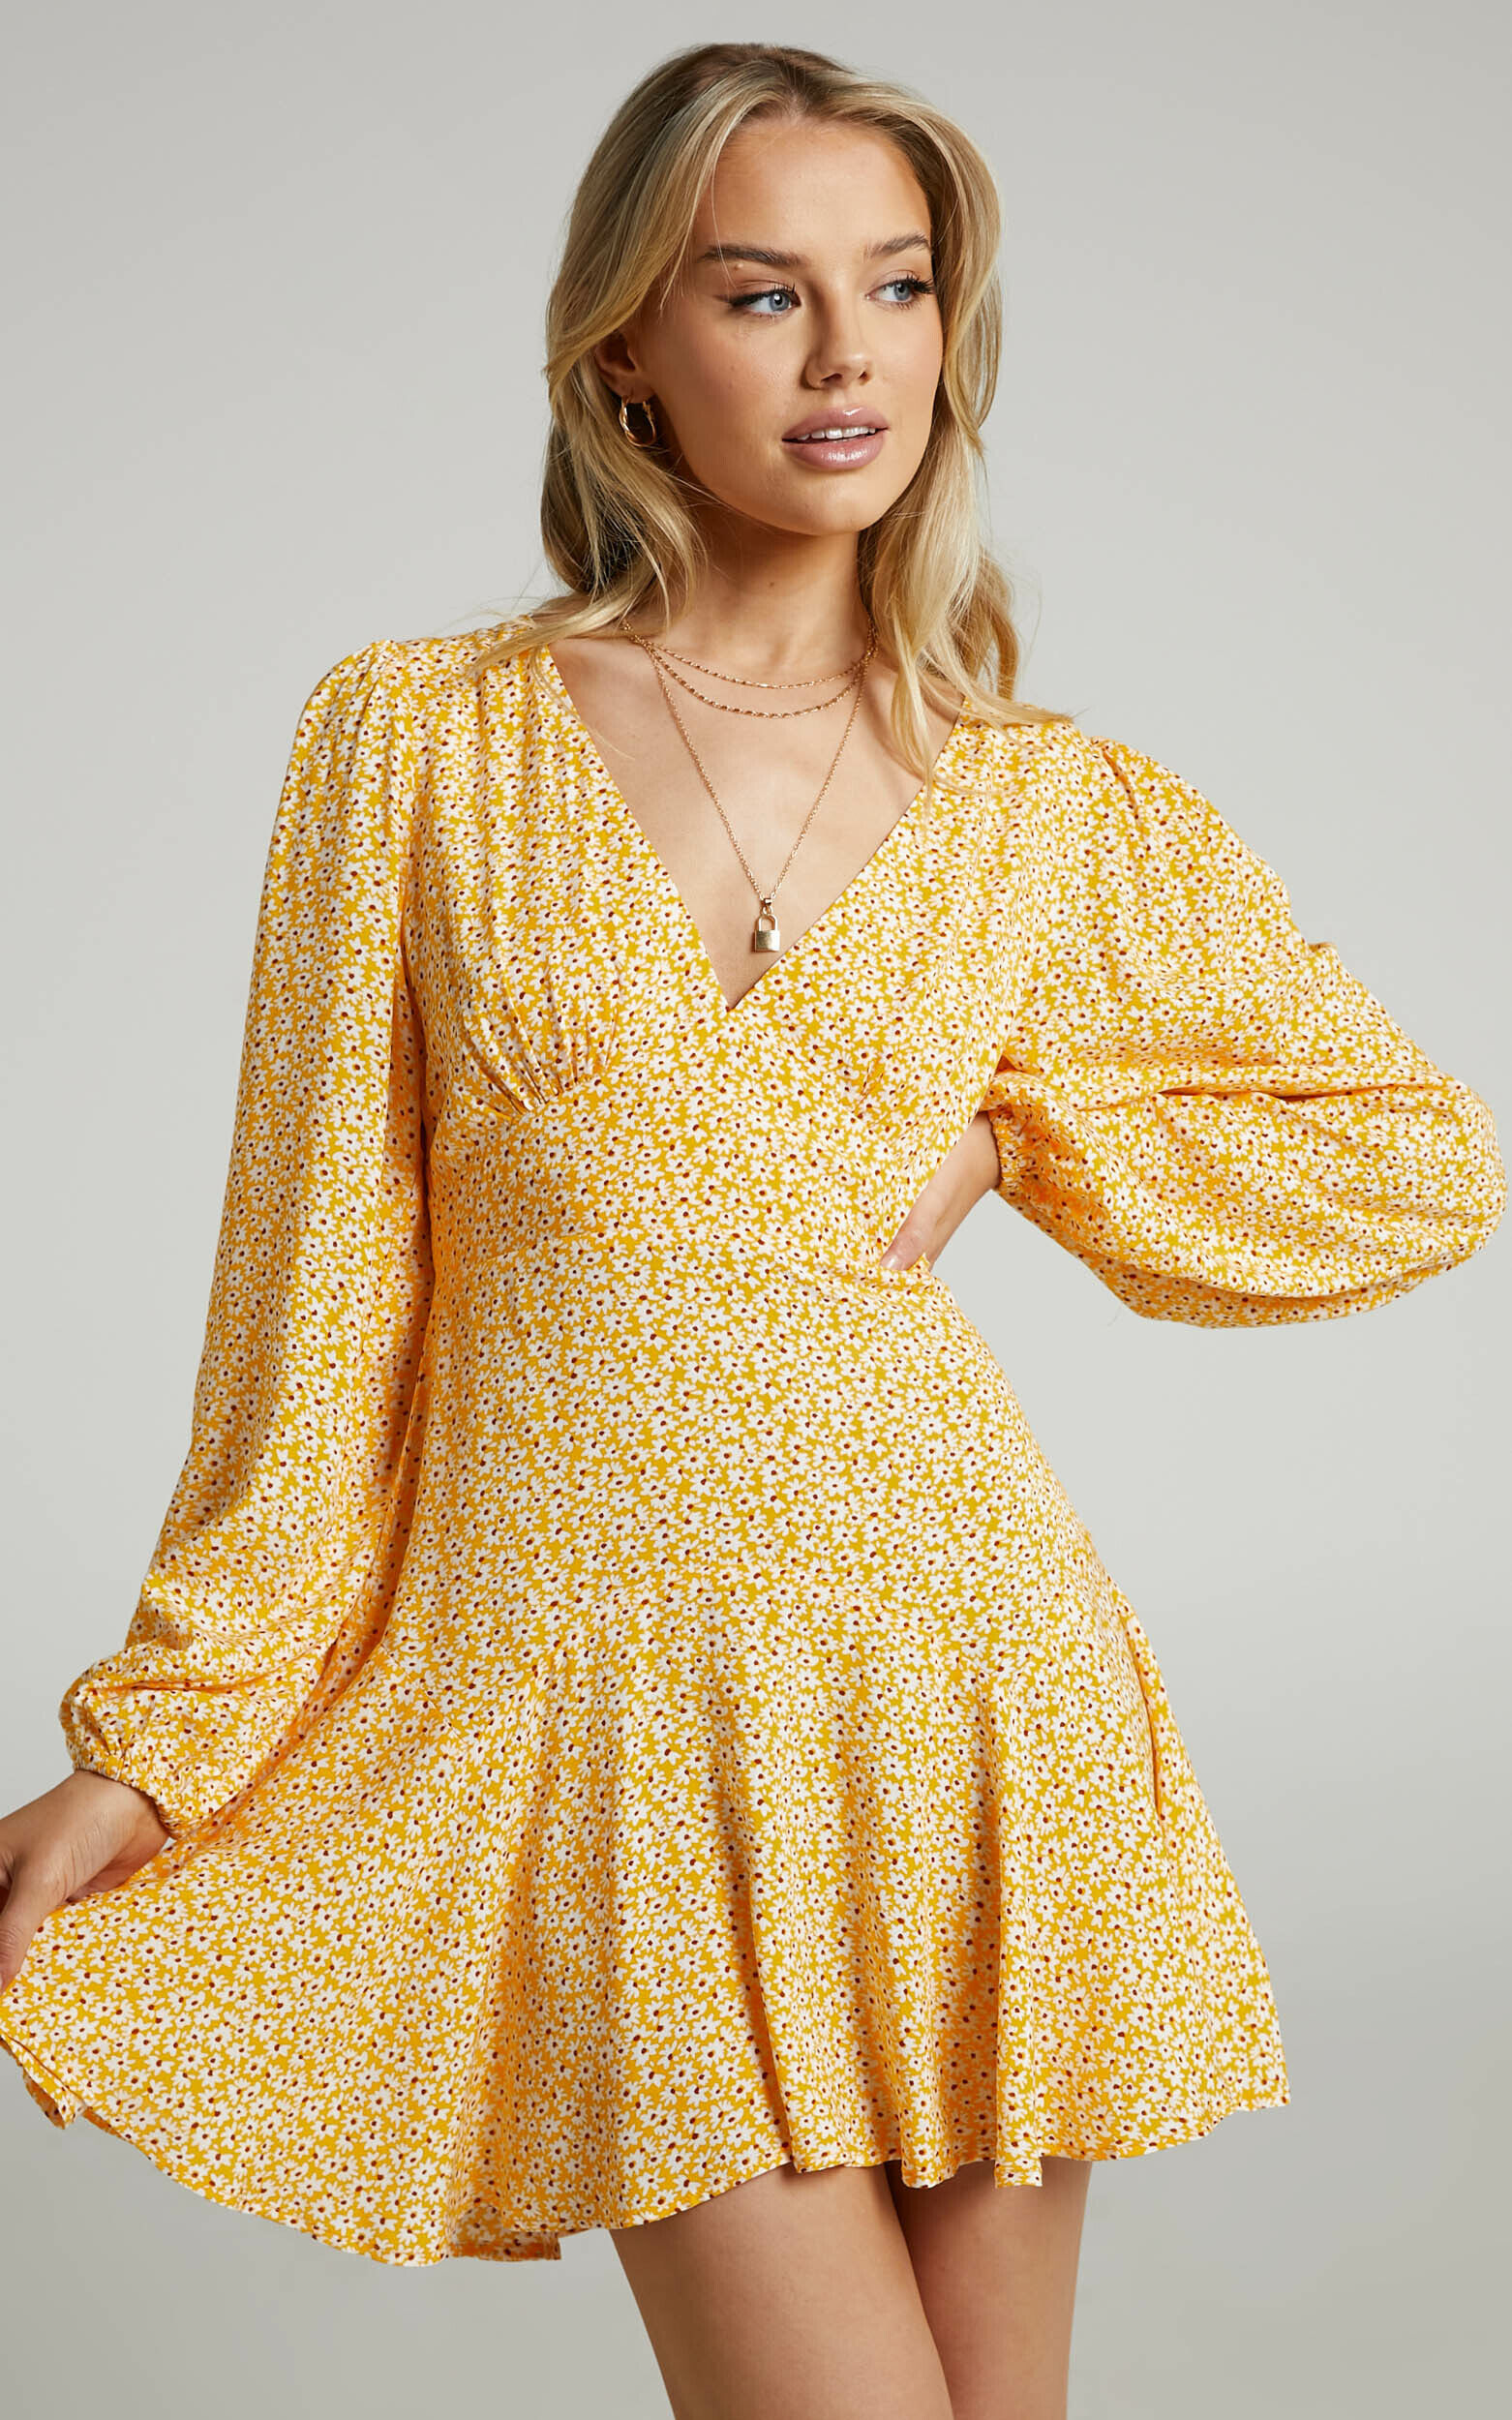 Riecha Long Sleeve Mini Dress in Yellow Floral - 04, YEL1, super-hi-res image number null